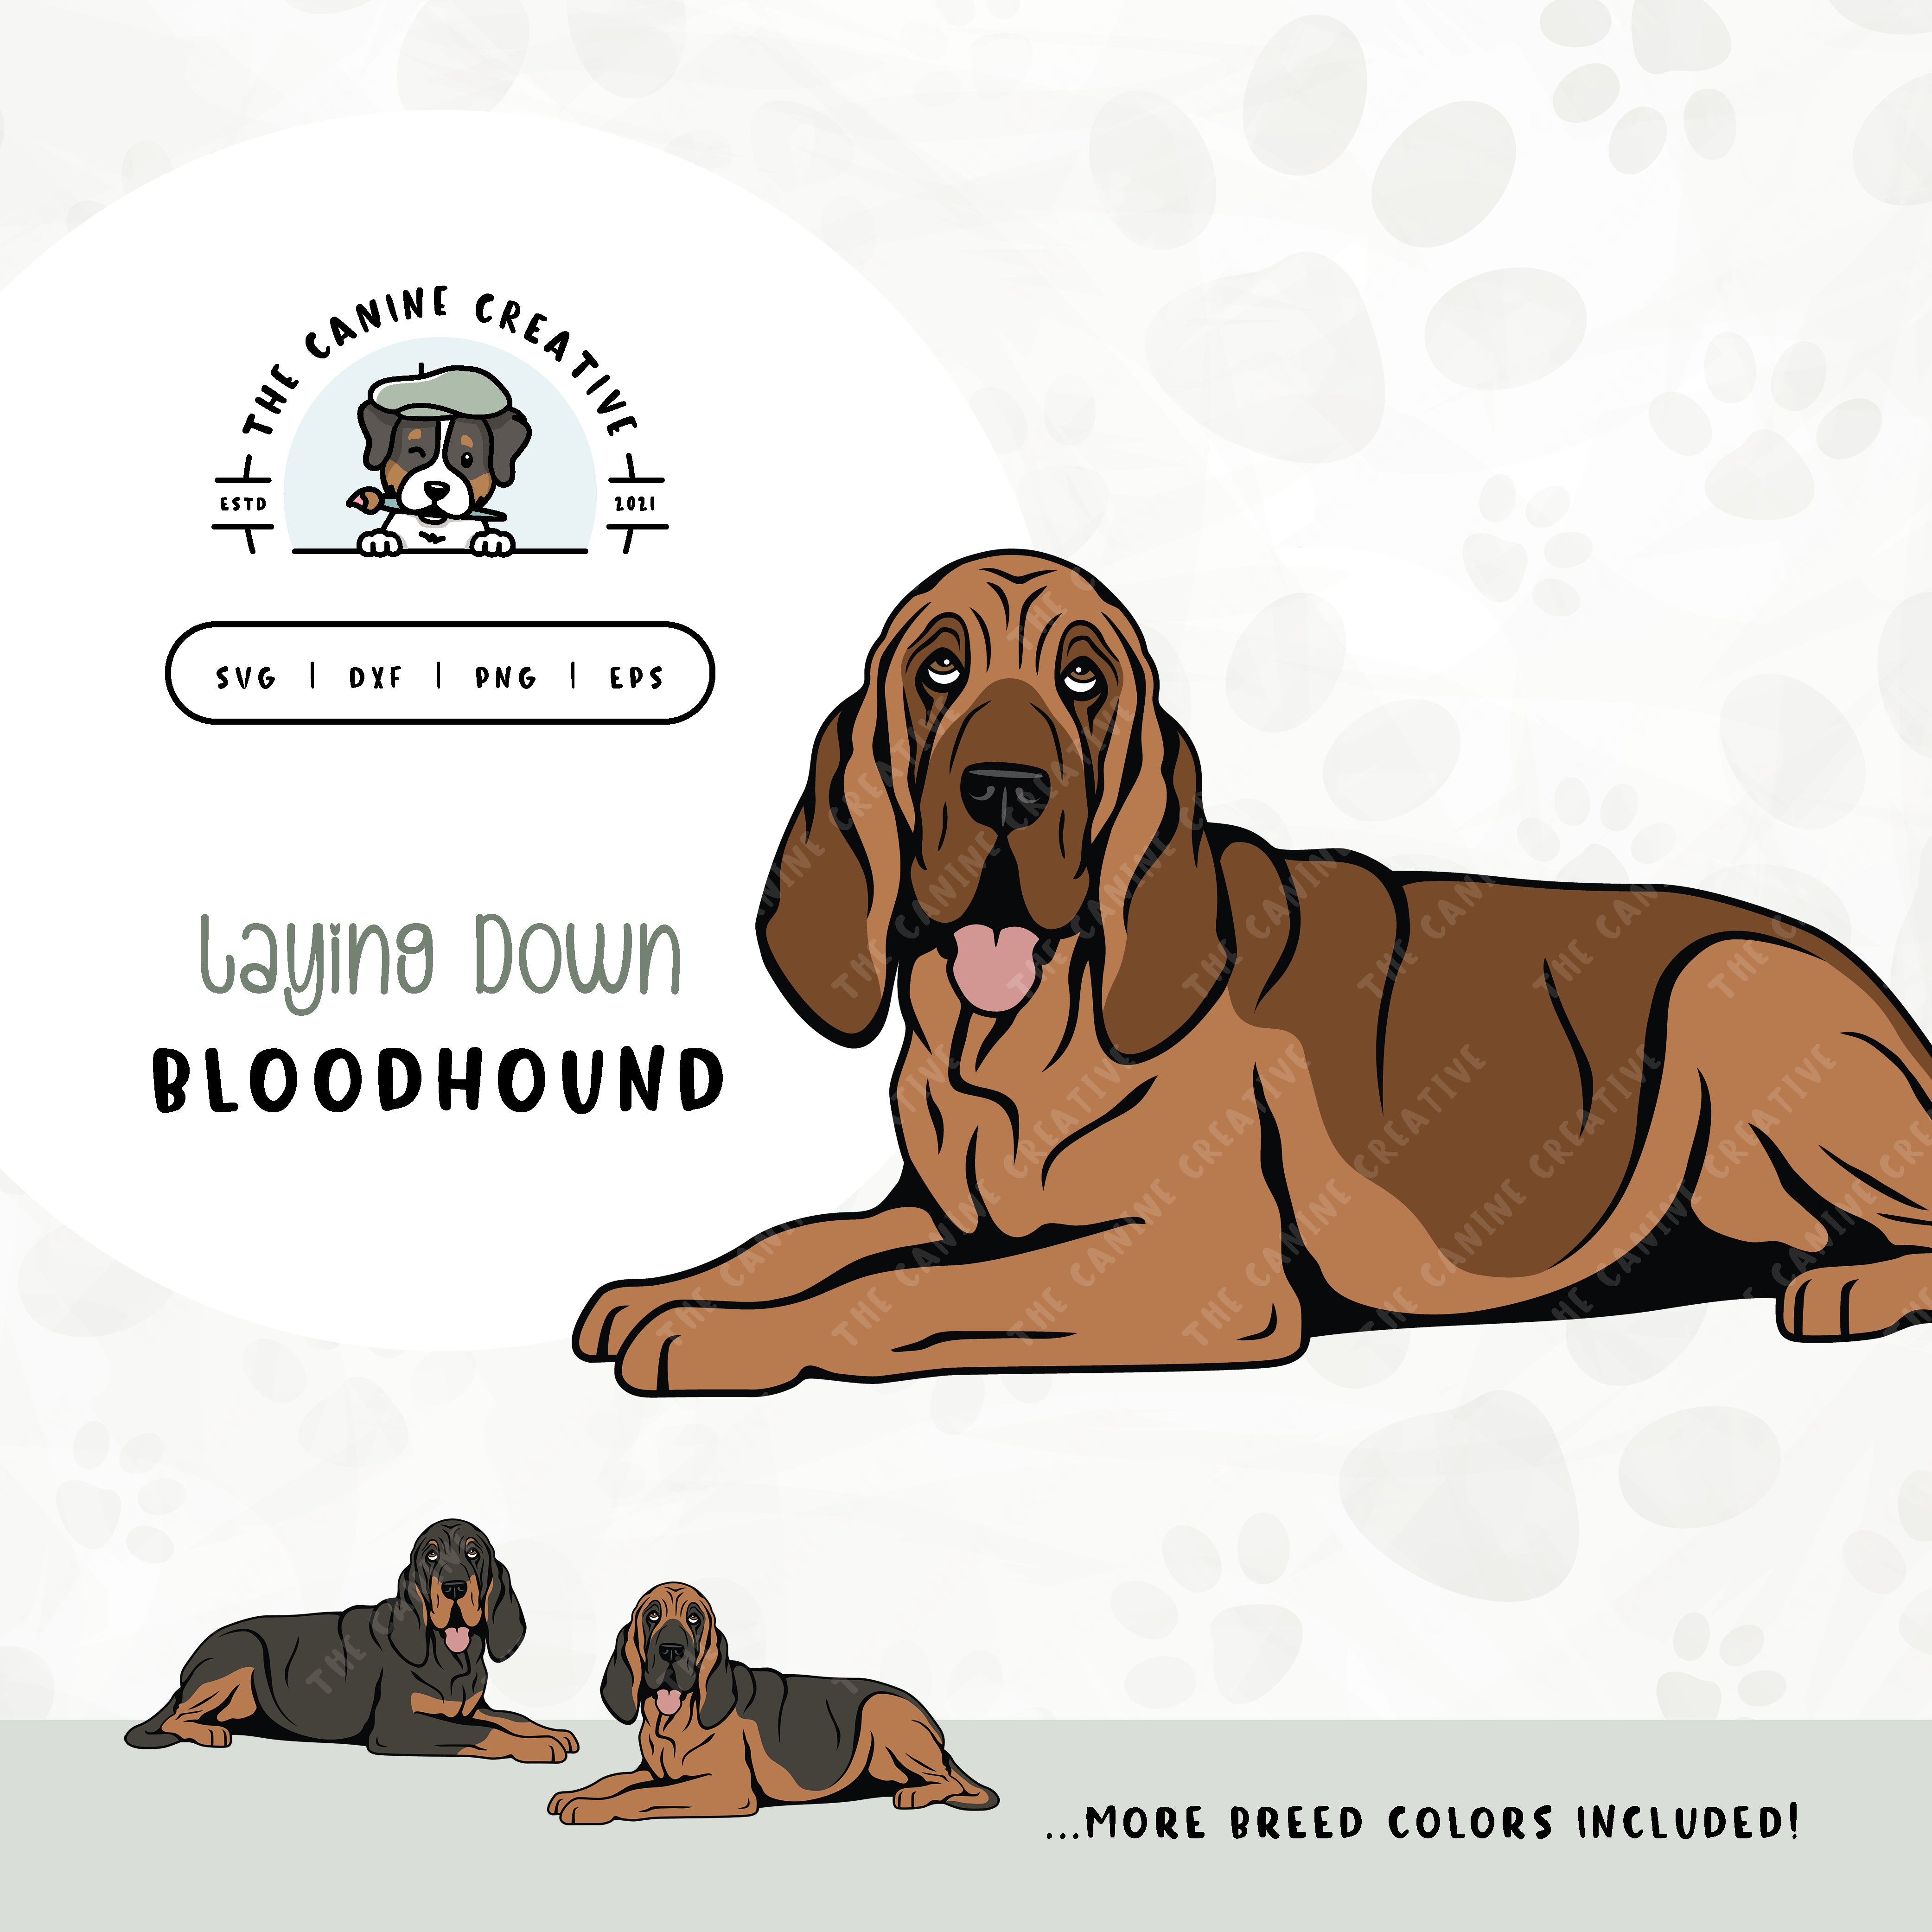 This laying down dog design features a Bloodhound. File formats include: SVG, DXF, PNG, and EPS.